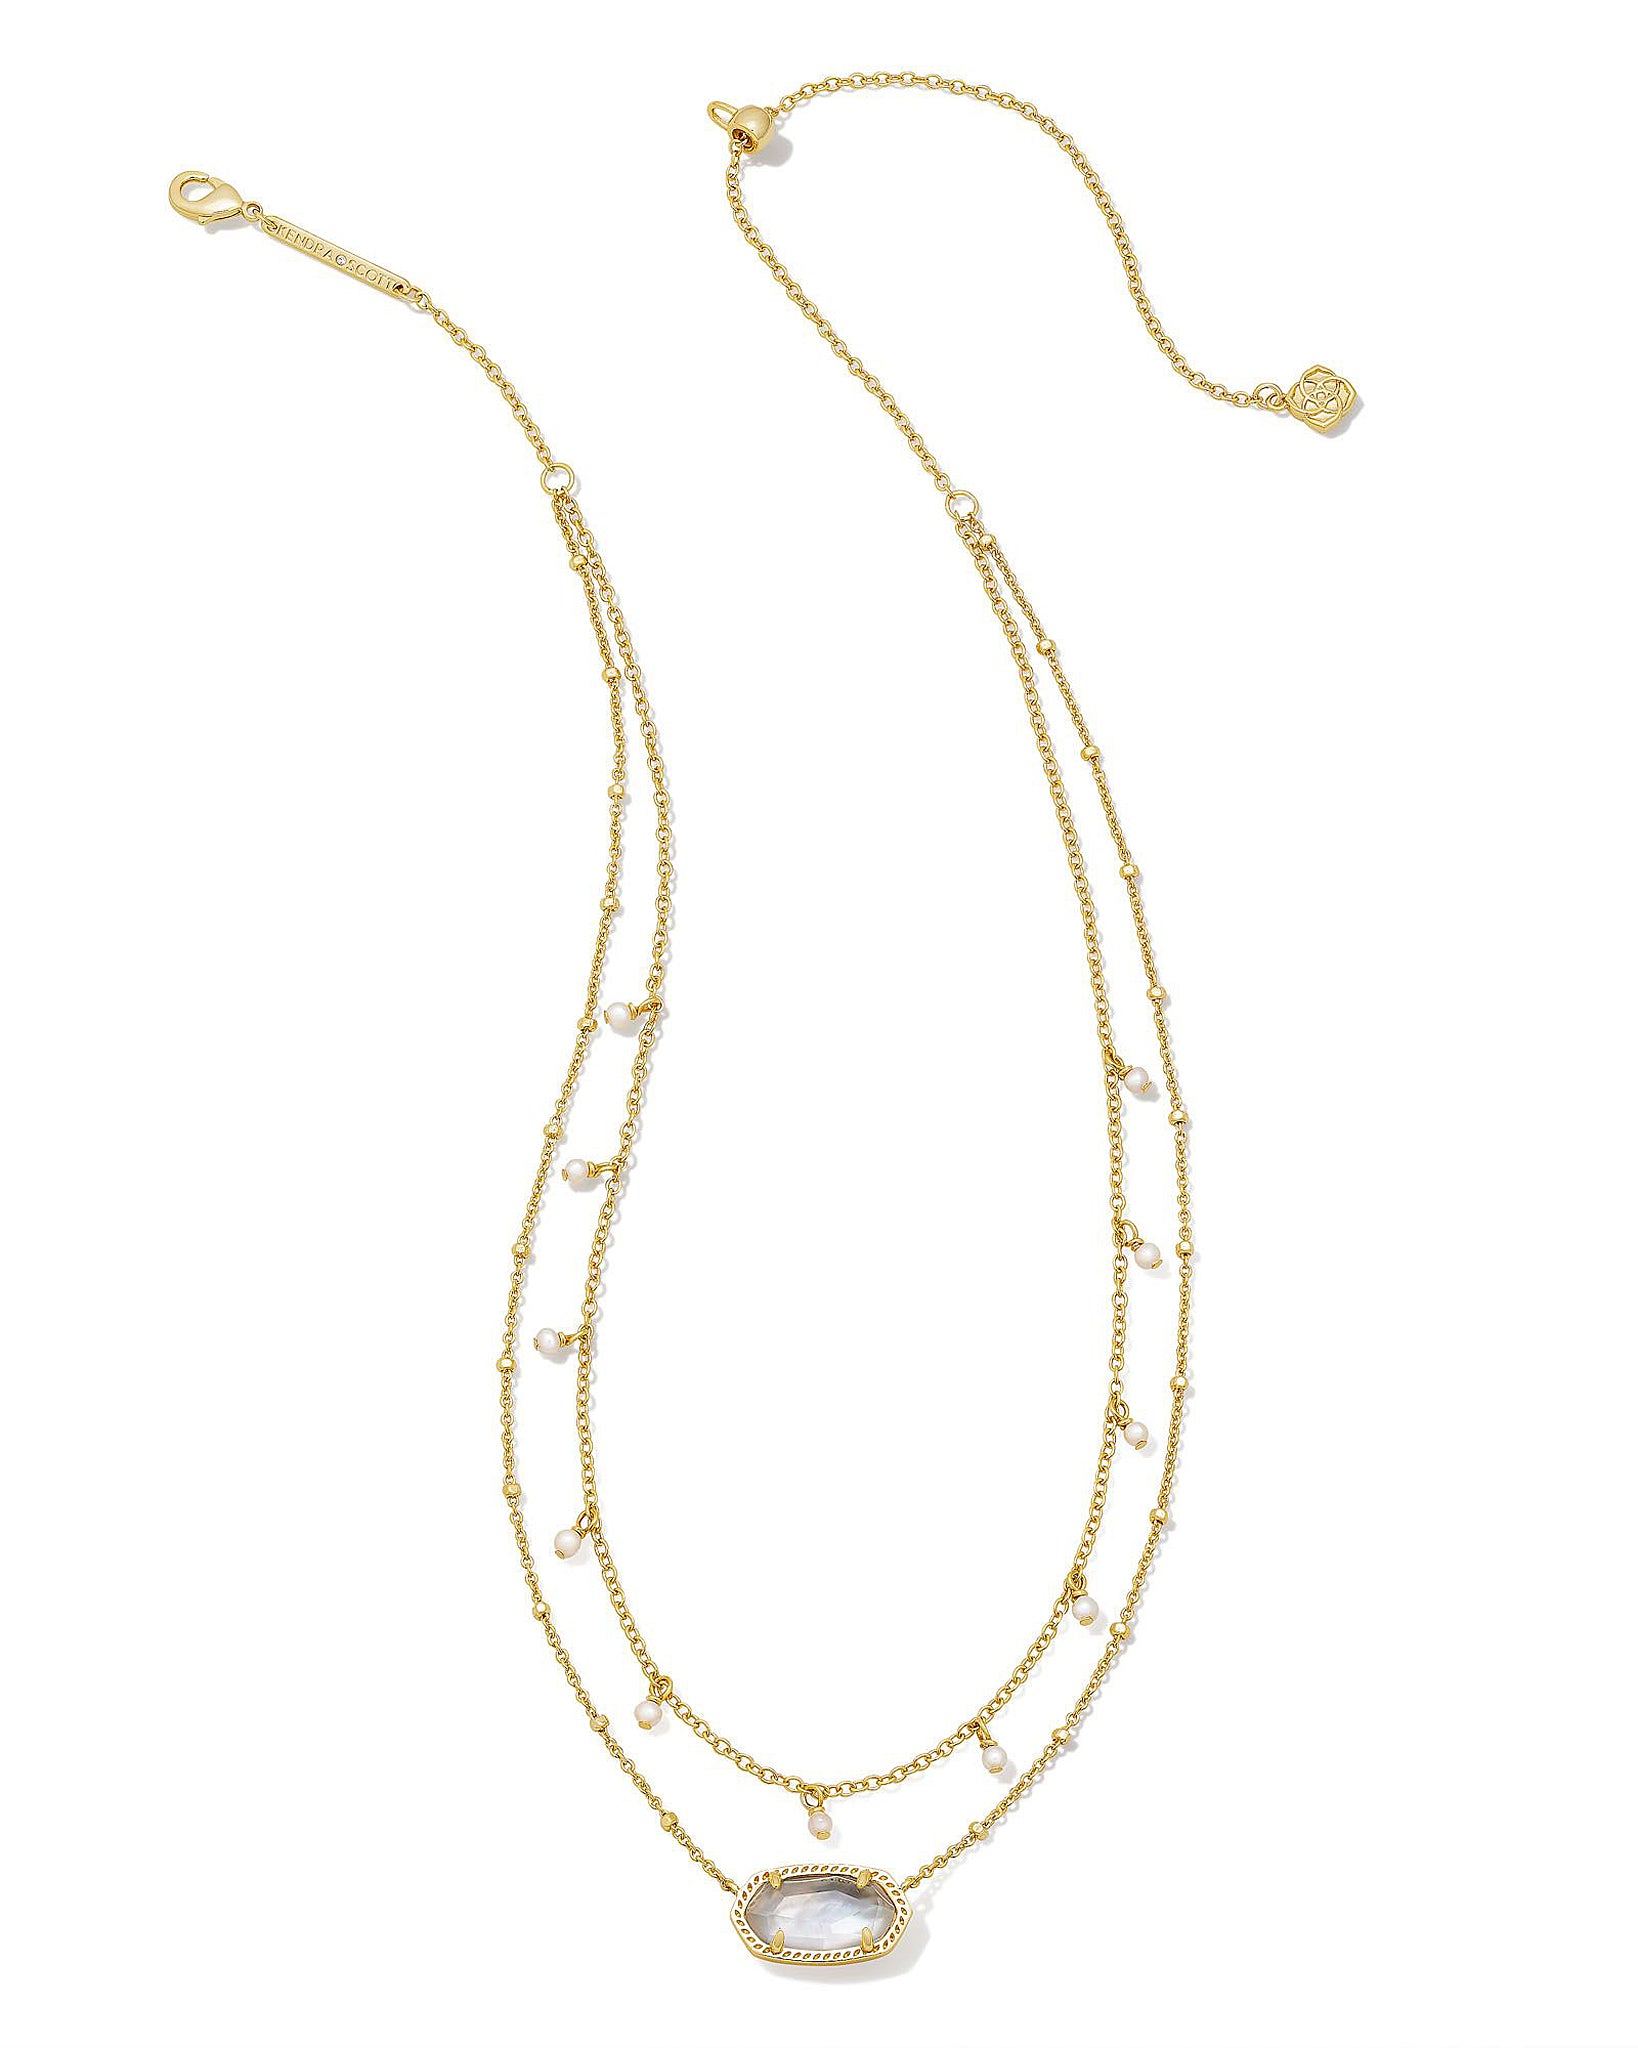 Kendra Scott Elisa Multi Strand Pearl Necklace in Ivory Mother of Pearl and Gold